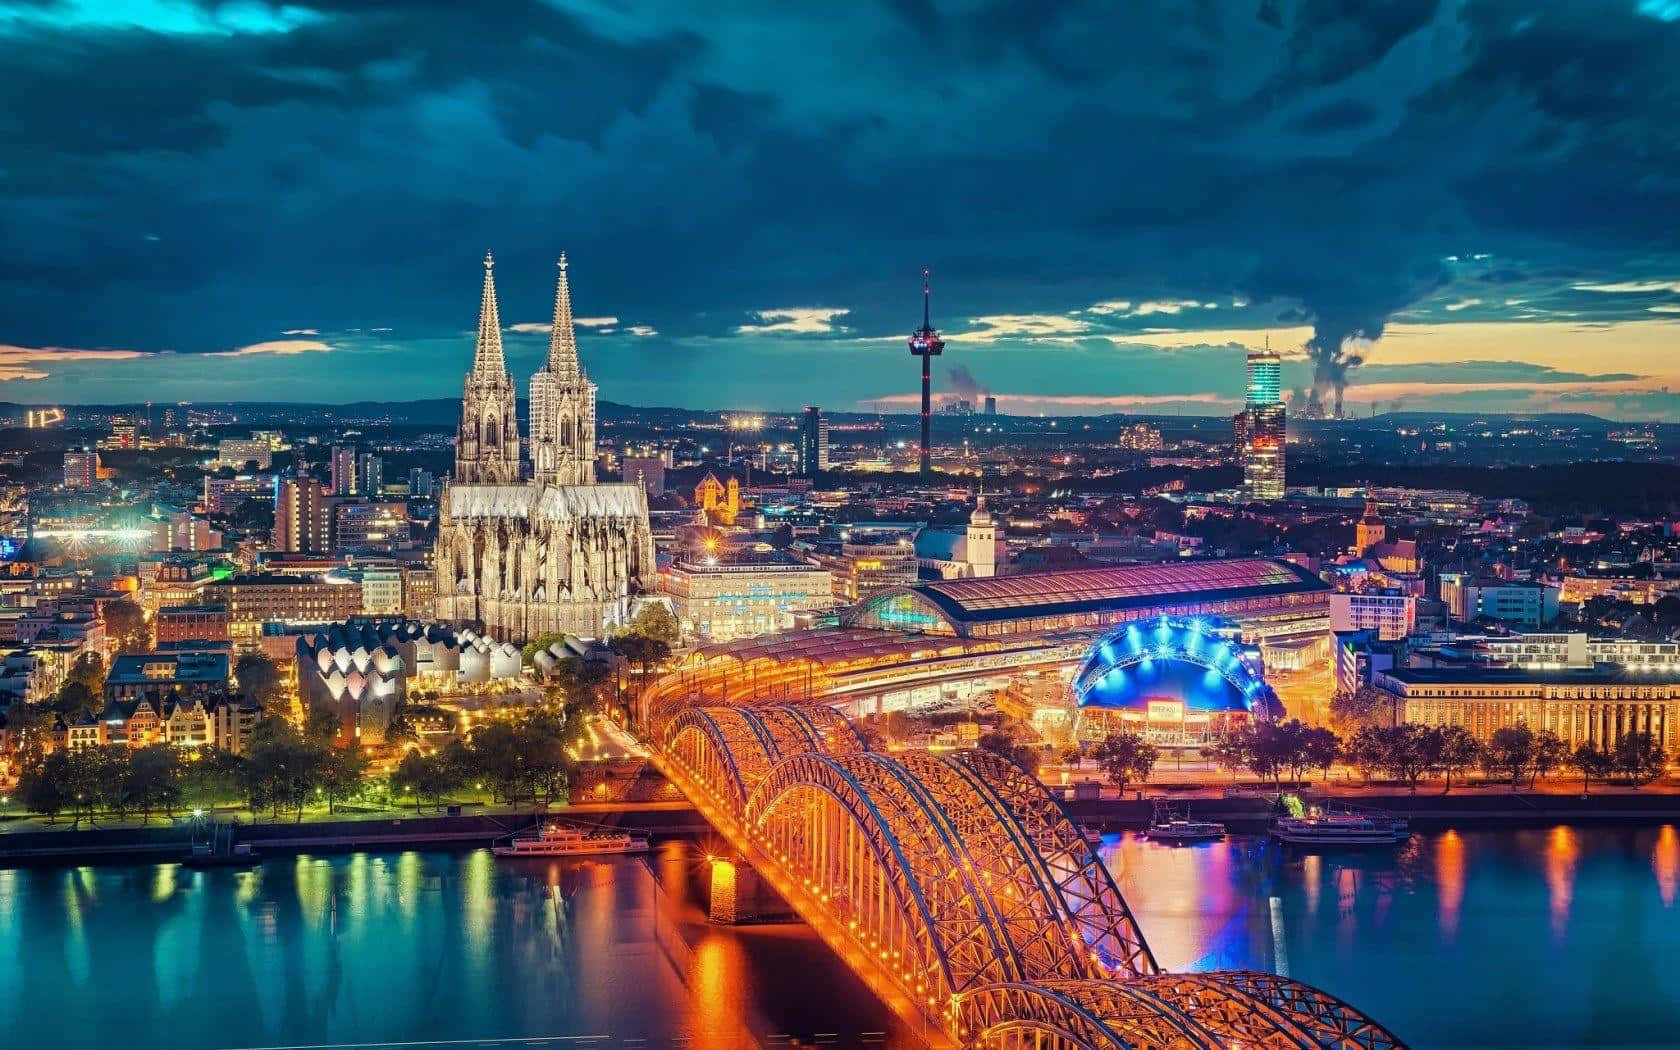 Bridge Over The Rhine River in Cologne, Germany